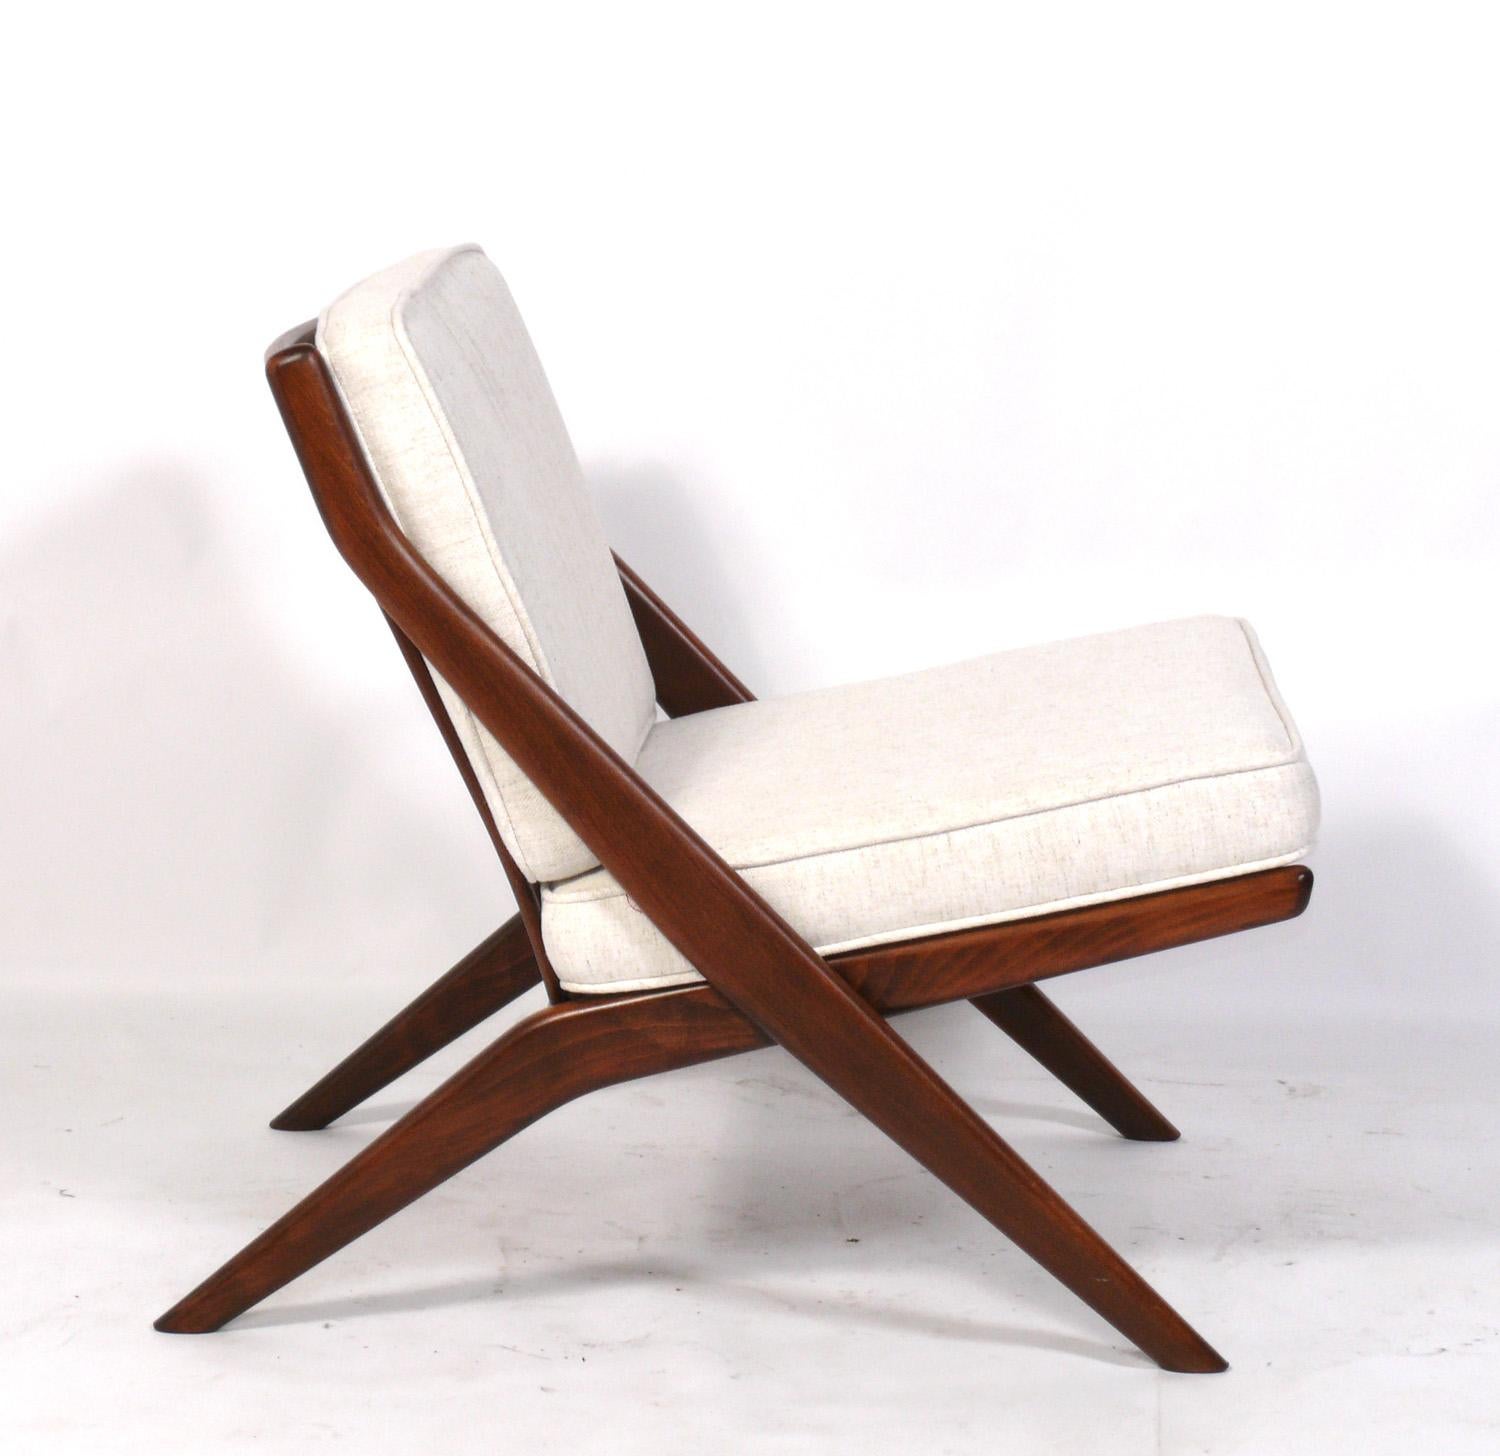 Sculptural Danish Modern style Scissor lounge chair, designed by Folke Ohlsson for Dux, Sweden, circa 1960s. The teak frame has been cleaned and Danish oiled and the cushions have been reupholstered in an ivory color herringbone fabric.